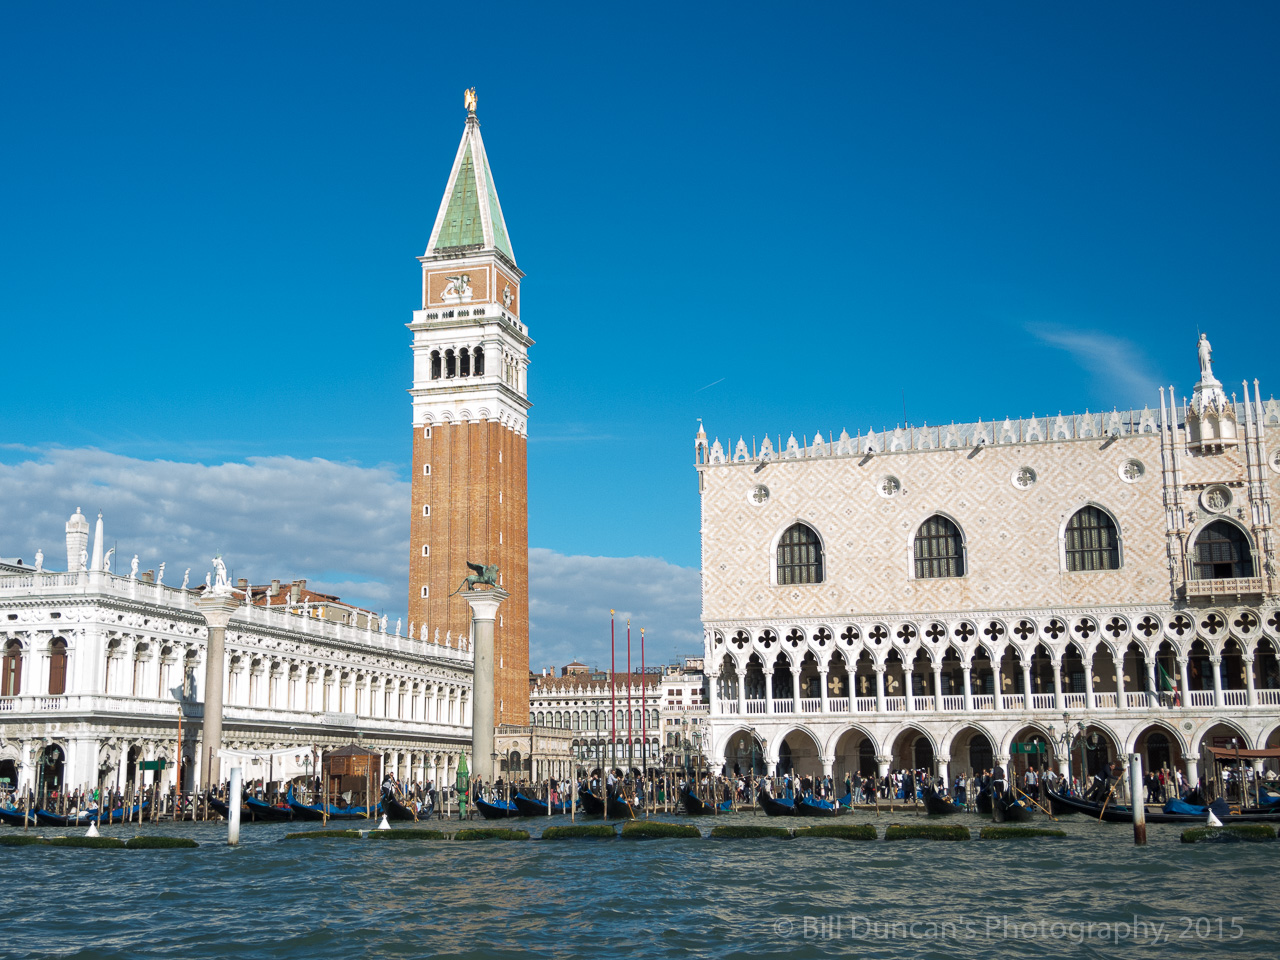 The iconic Piazza San Marco